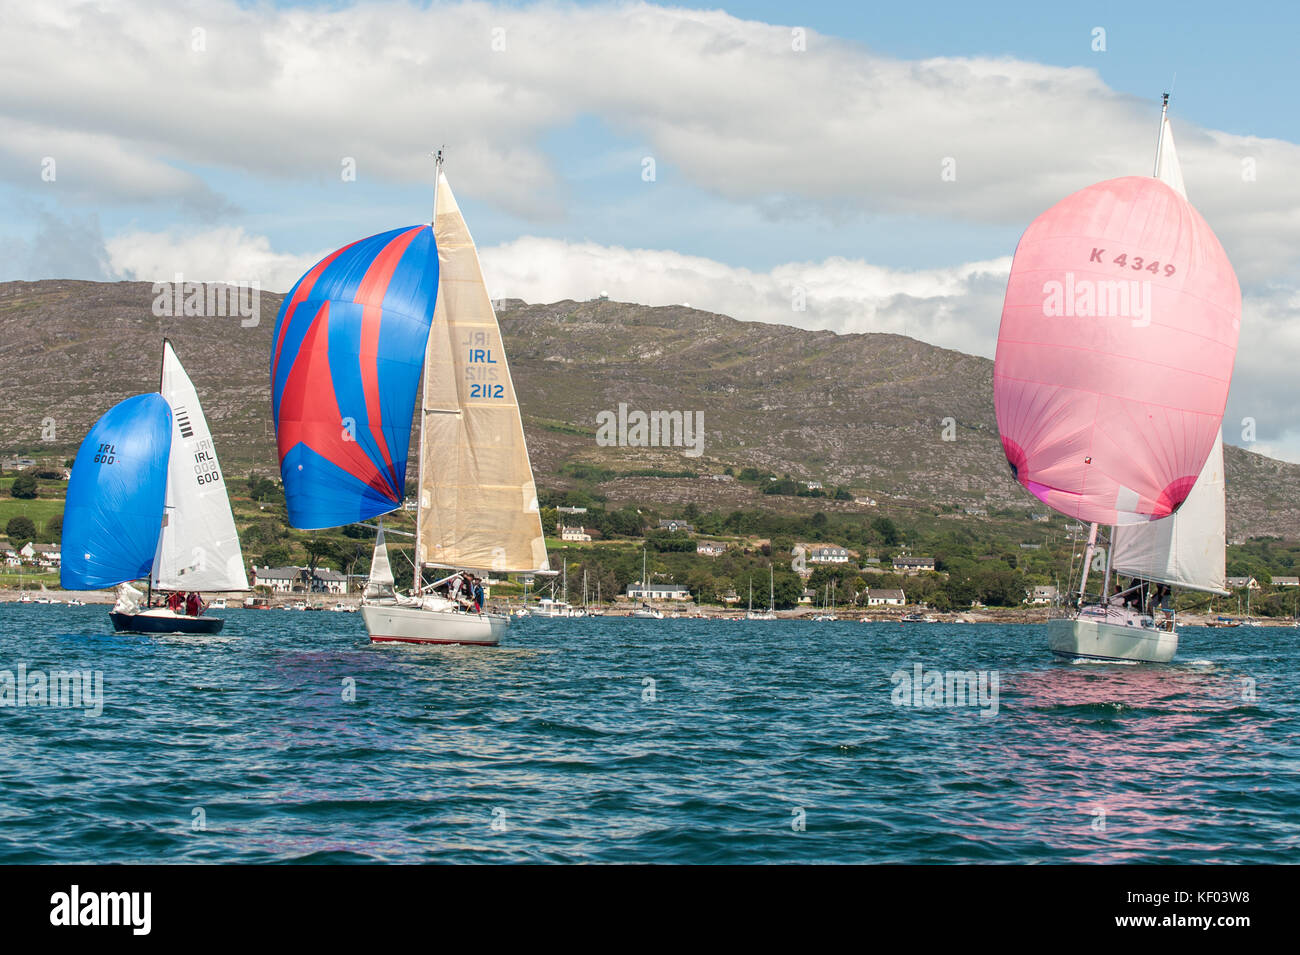 Yachts with their spinnakers flying race during Schull Calves Week, Schull, West Cork, Ireland with copy space. Stock Photo